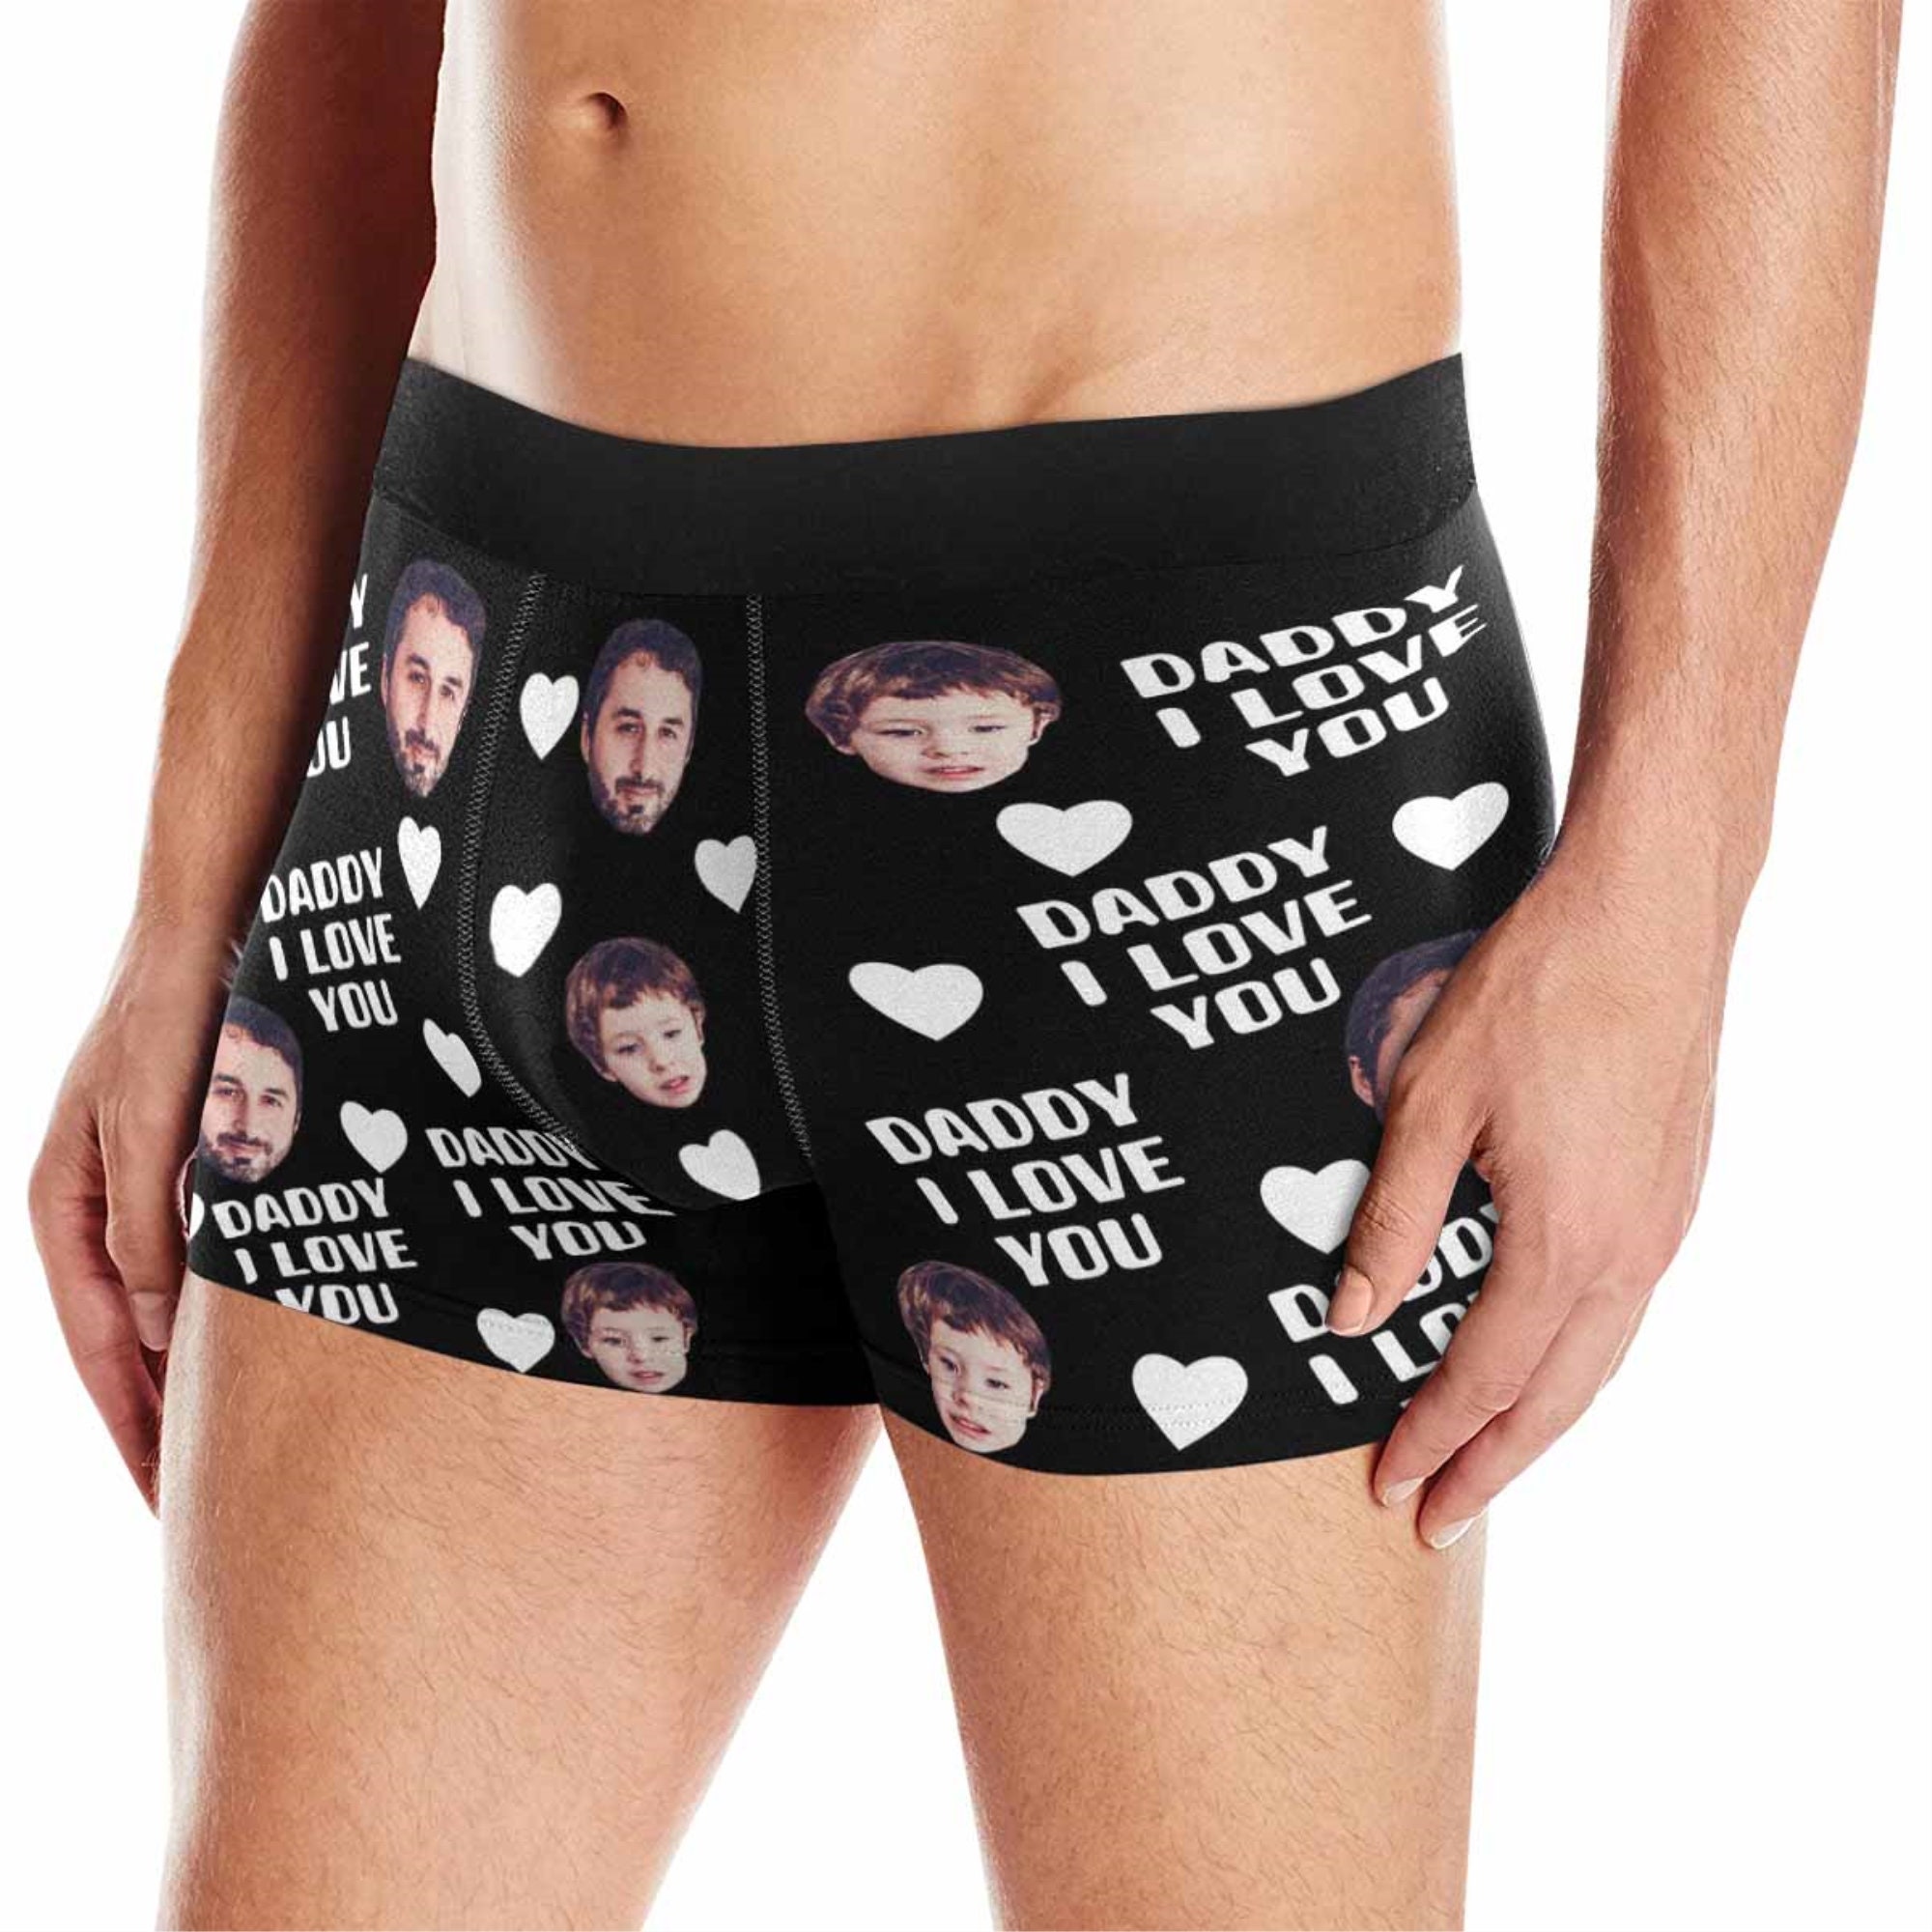 personalized boxers for him